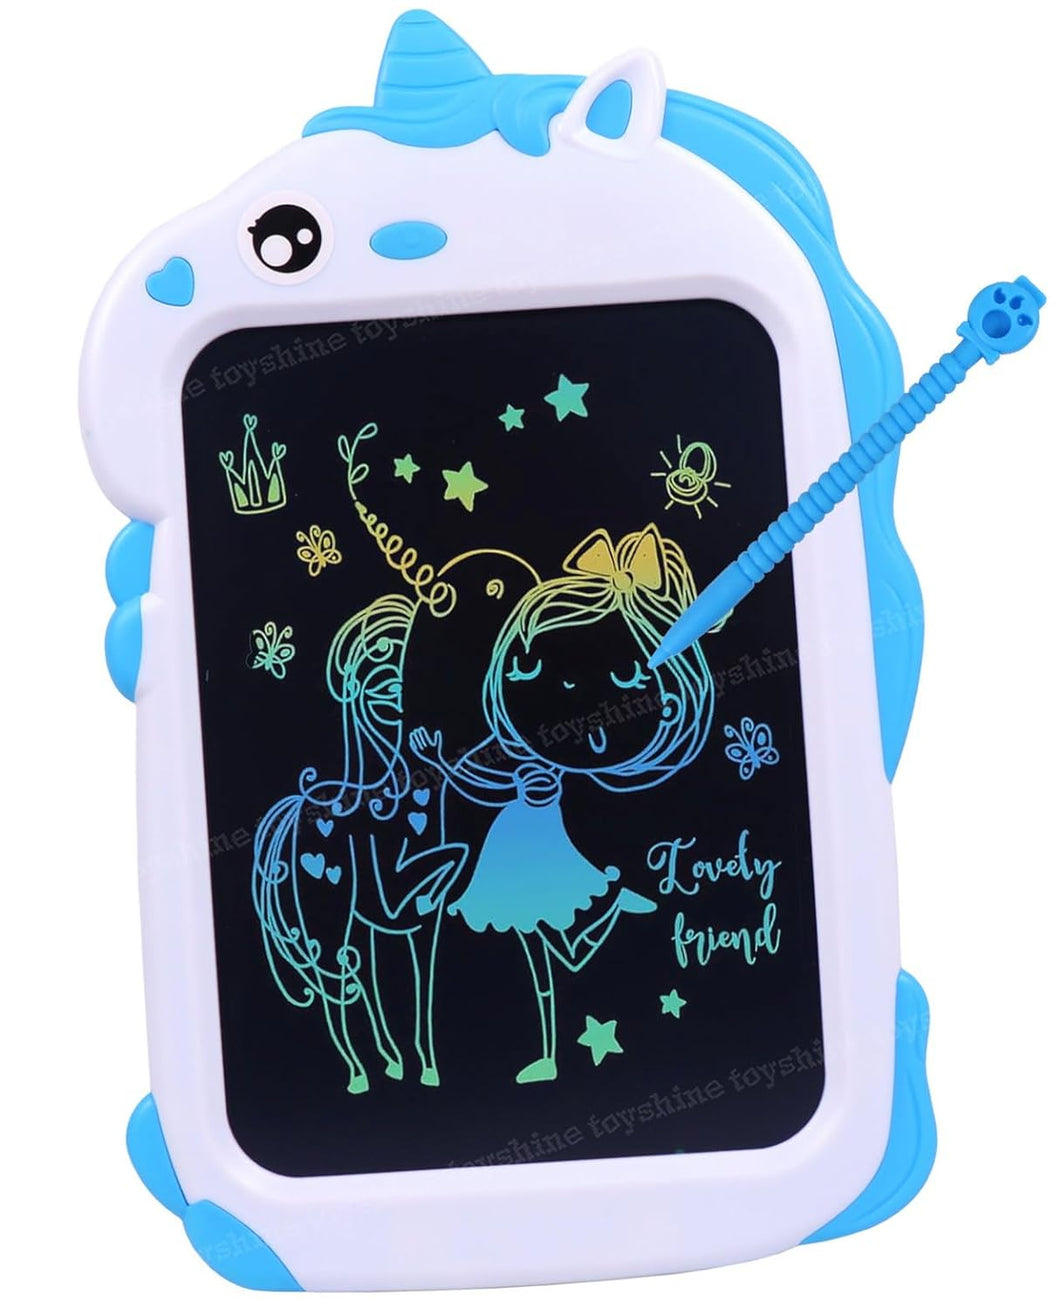 Toyshine Unicorn Design Writing Tablet for Kids, 8.5 Inches LCD Tab for Kids Drawing Pad Doodle Board Scribble and Play for 3-10 Years Old Boys/Girls Gifts Education Learning Toys- Blue